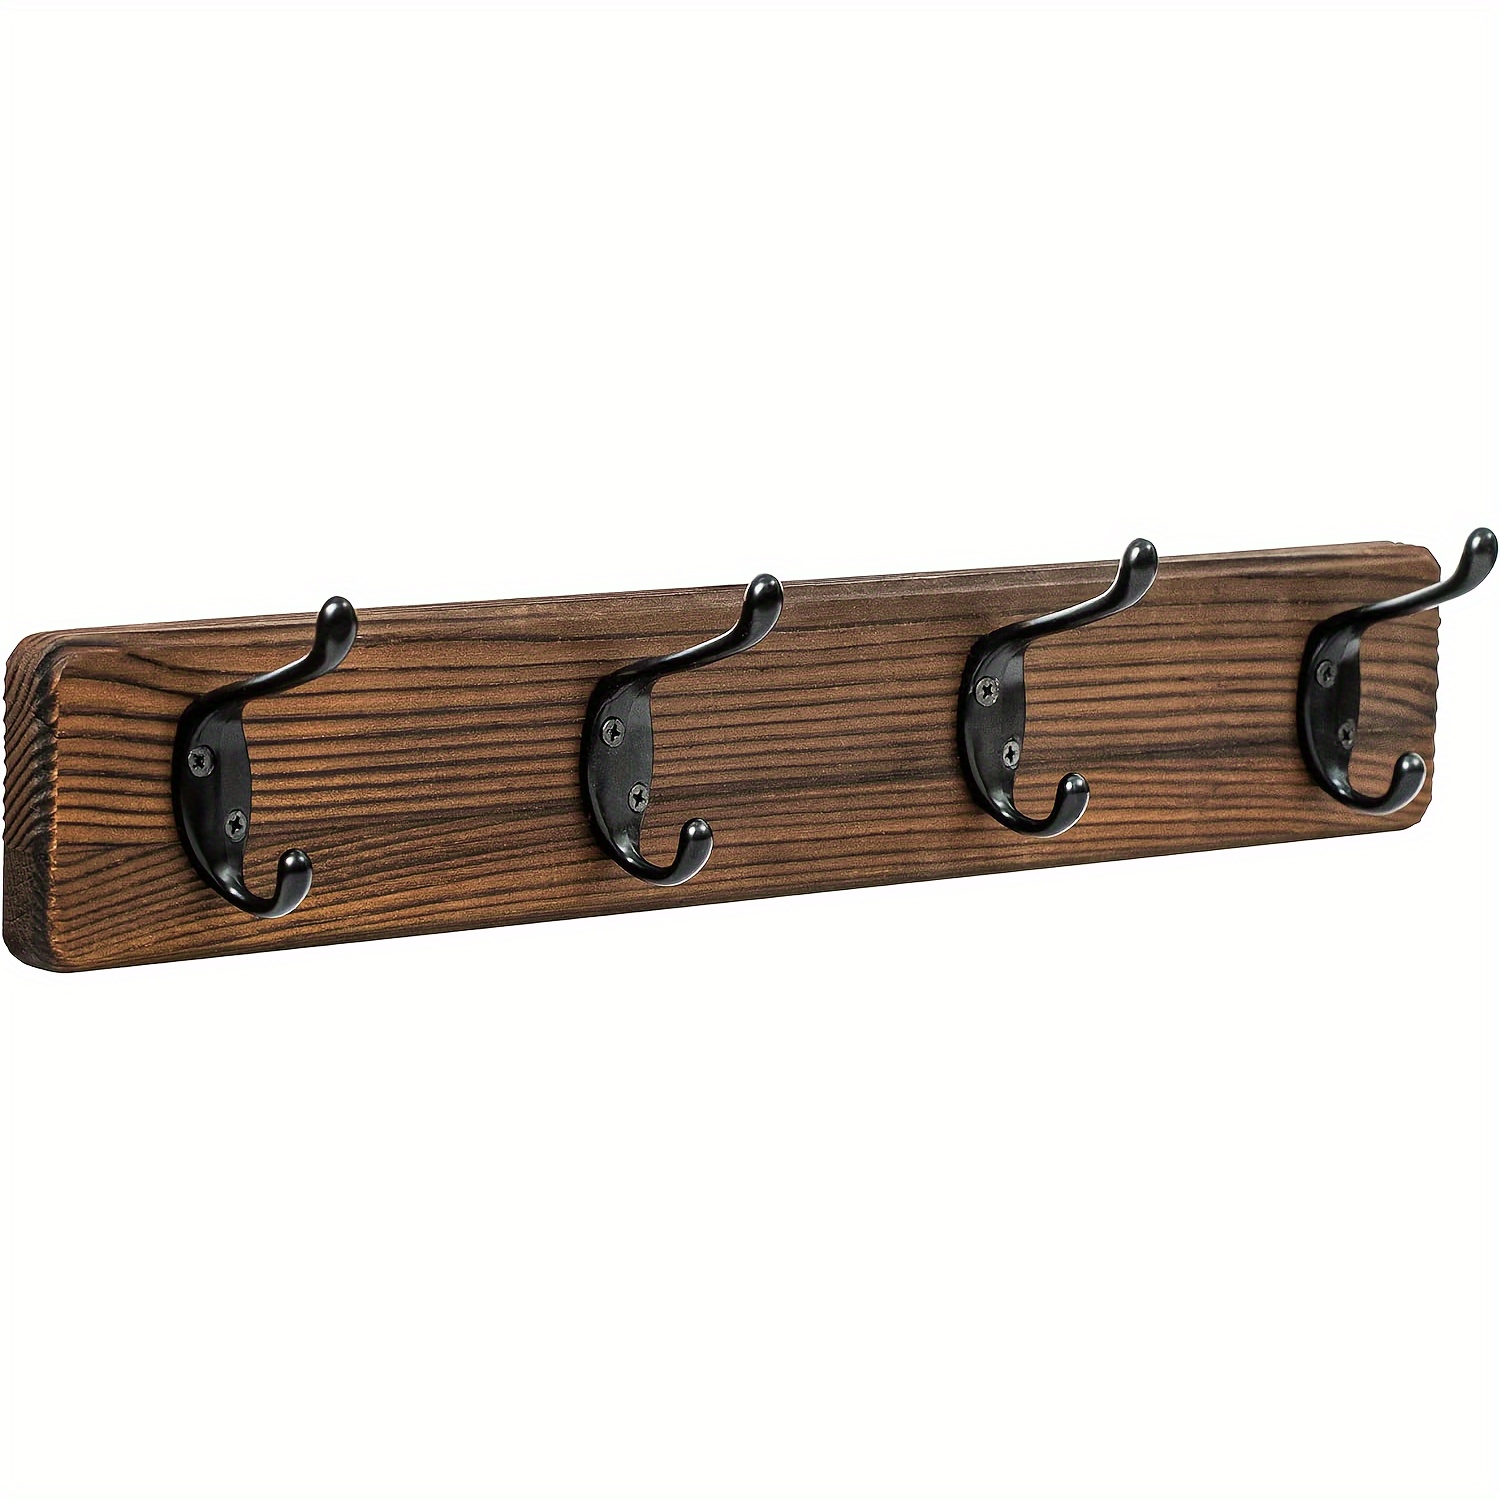 

Wall Mounted Coat Rack - Metal Coat Hooks Hanger With Pine Solid Wood Board, 4 Black Literary Rustic Hooks Rail Wall Mount For Hanging Coats, Clothes, Bags, Hat, Towel